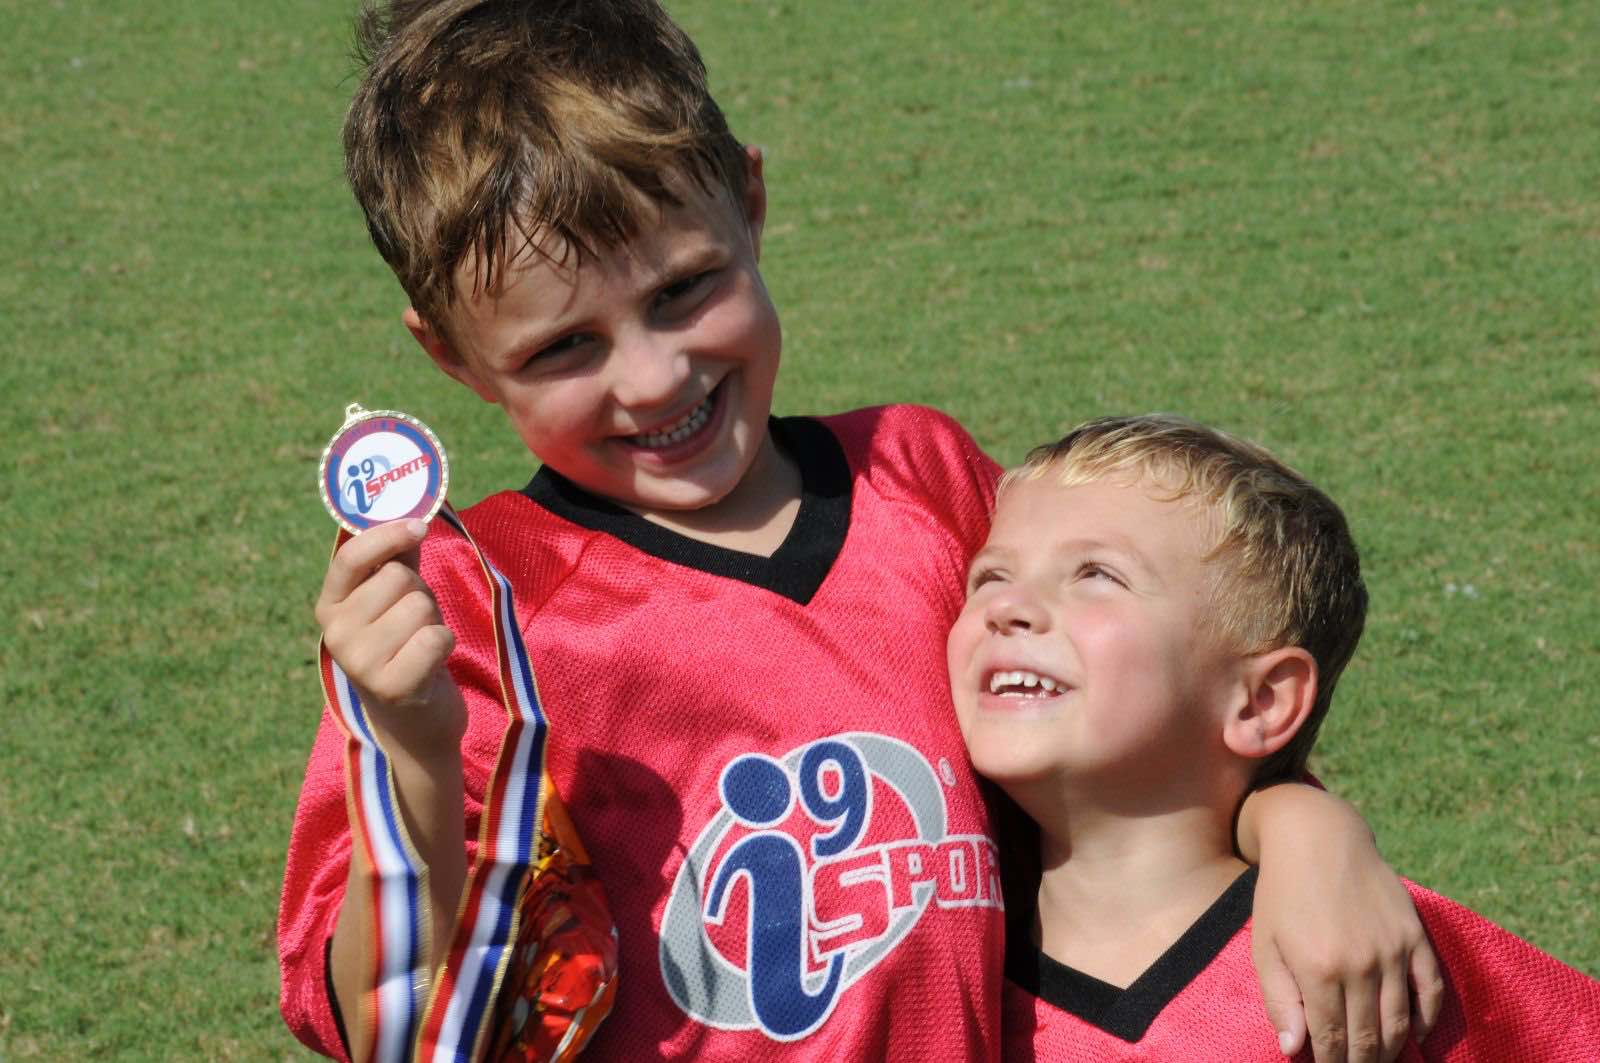 Our Growing Youth Sports Business is Built on Better Customer Service